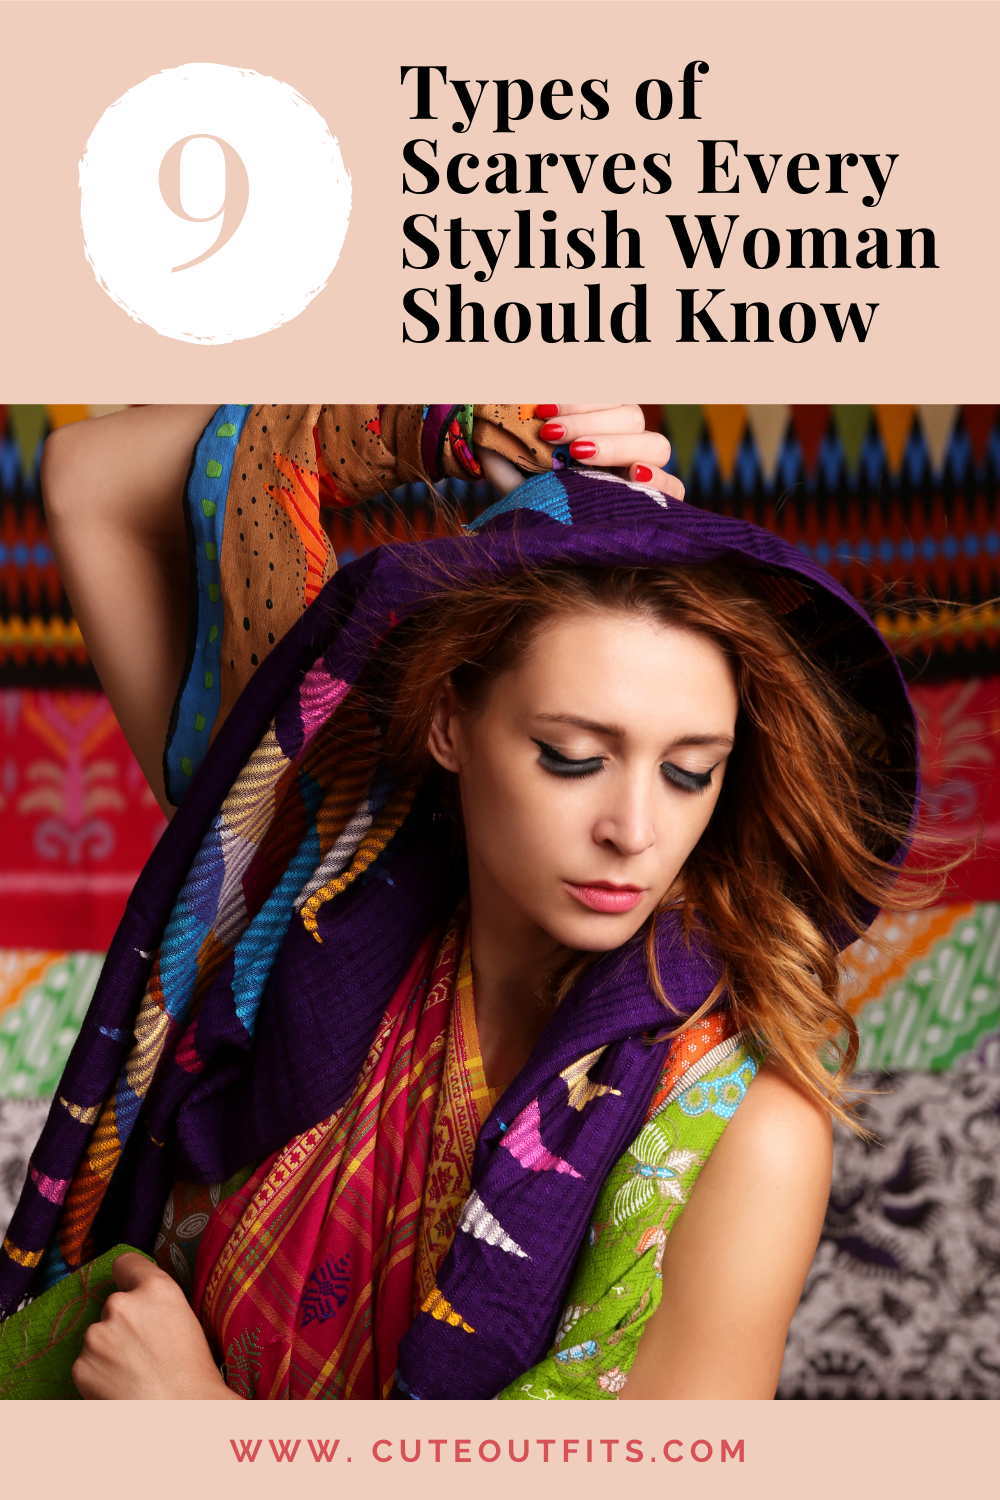 placard | 9 Types of Scarves Every Stylish Woman Should Know